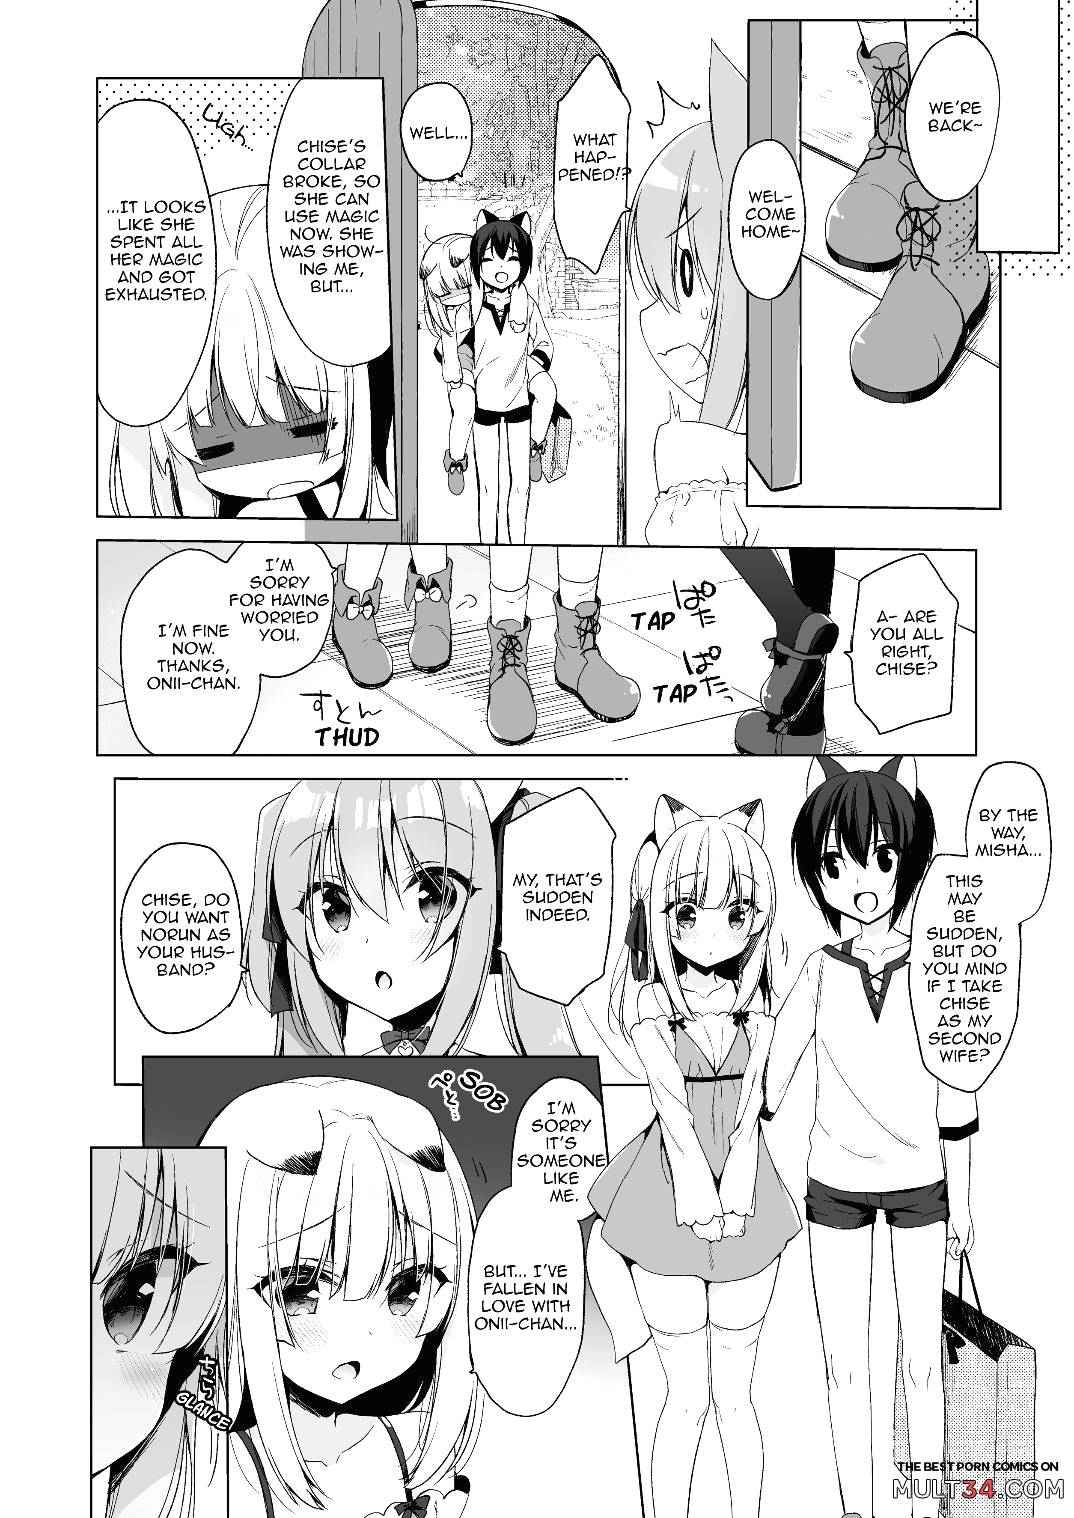 My Ideal Life in Another World Vol 4 page 13